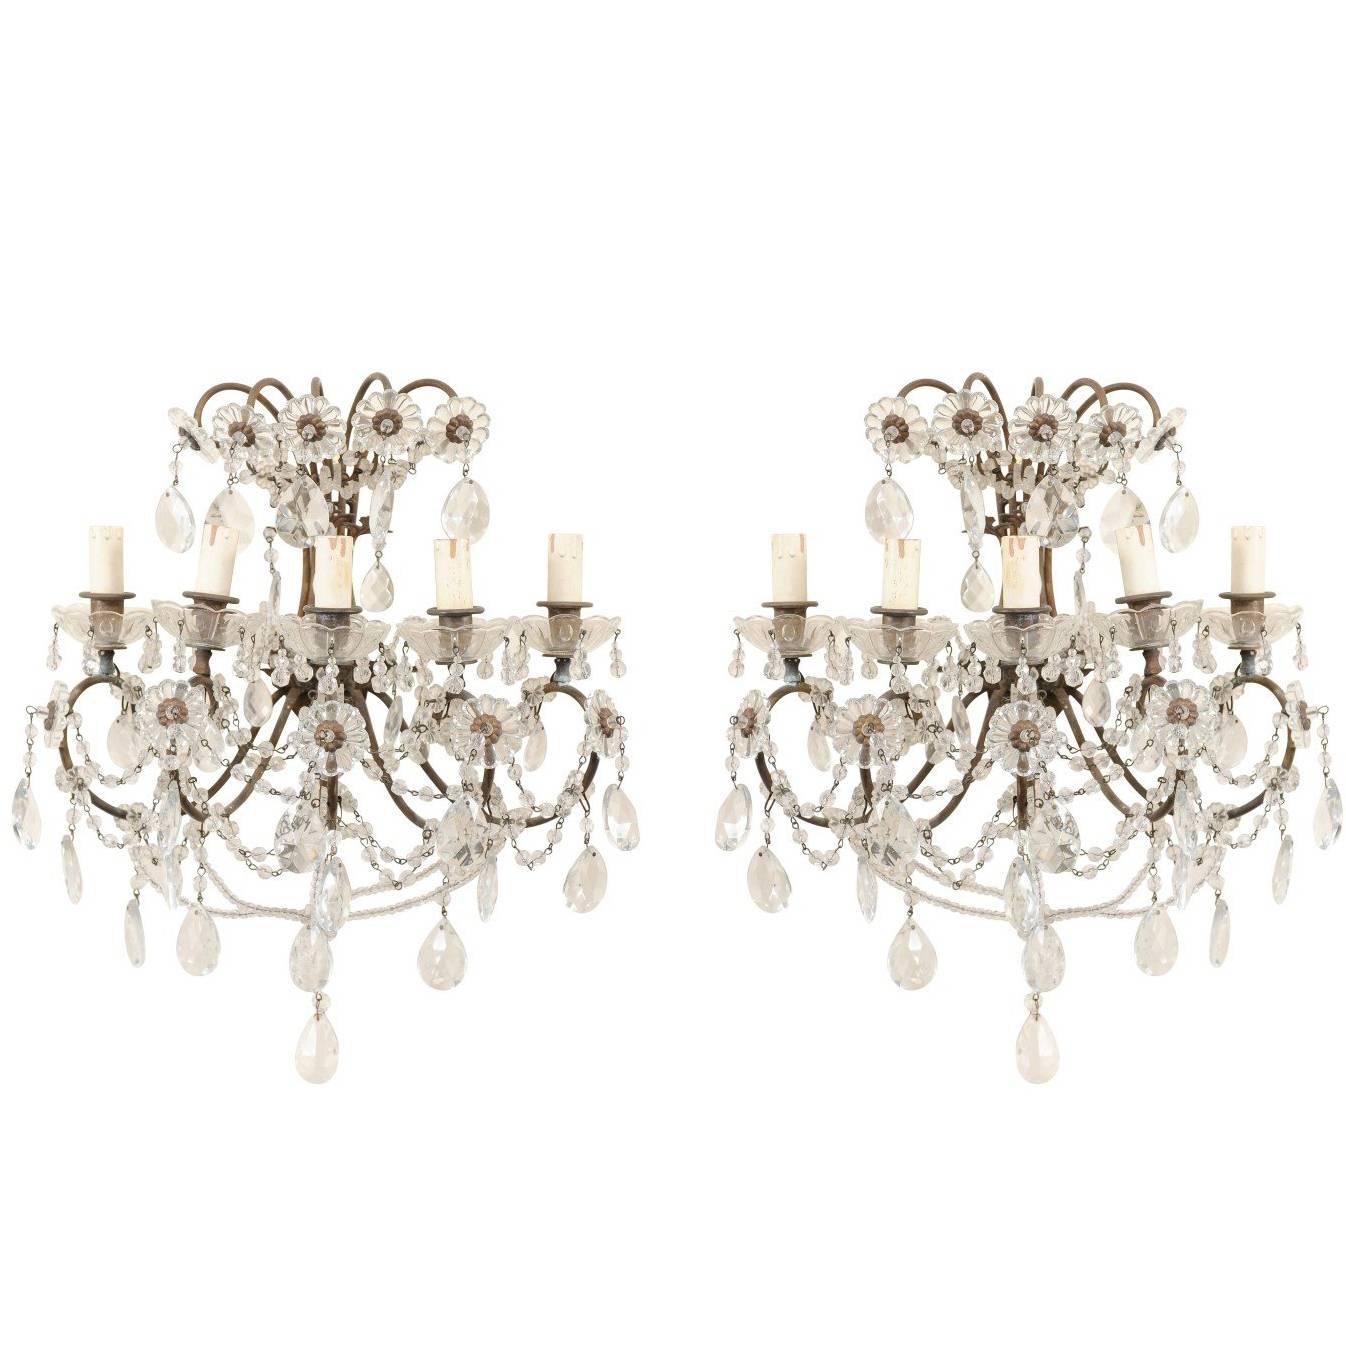 Pair of Italian Crystal Sconces w/ Waterfall Tops and Scrolling Metal Armature